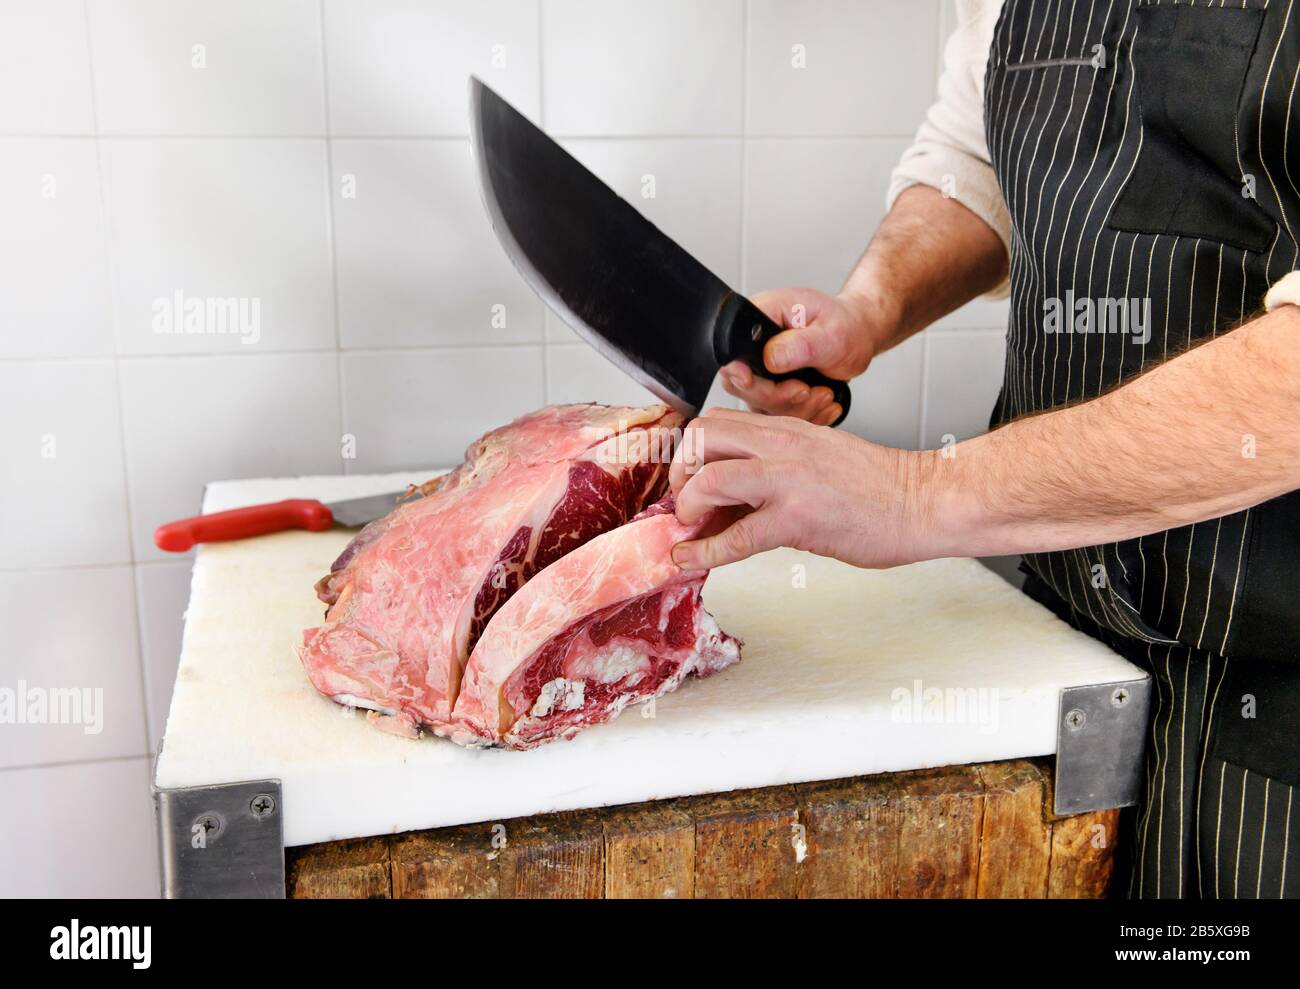 Butcher using a large cleaver to cut rib eye steaks on a butchers board in the butchery in a close up on his hands Stock Photo